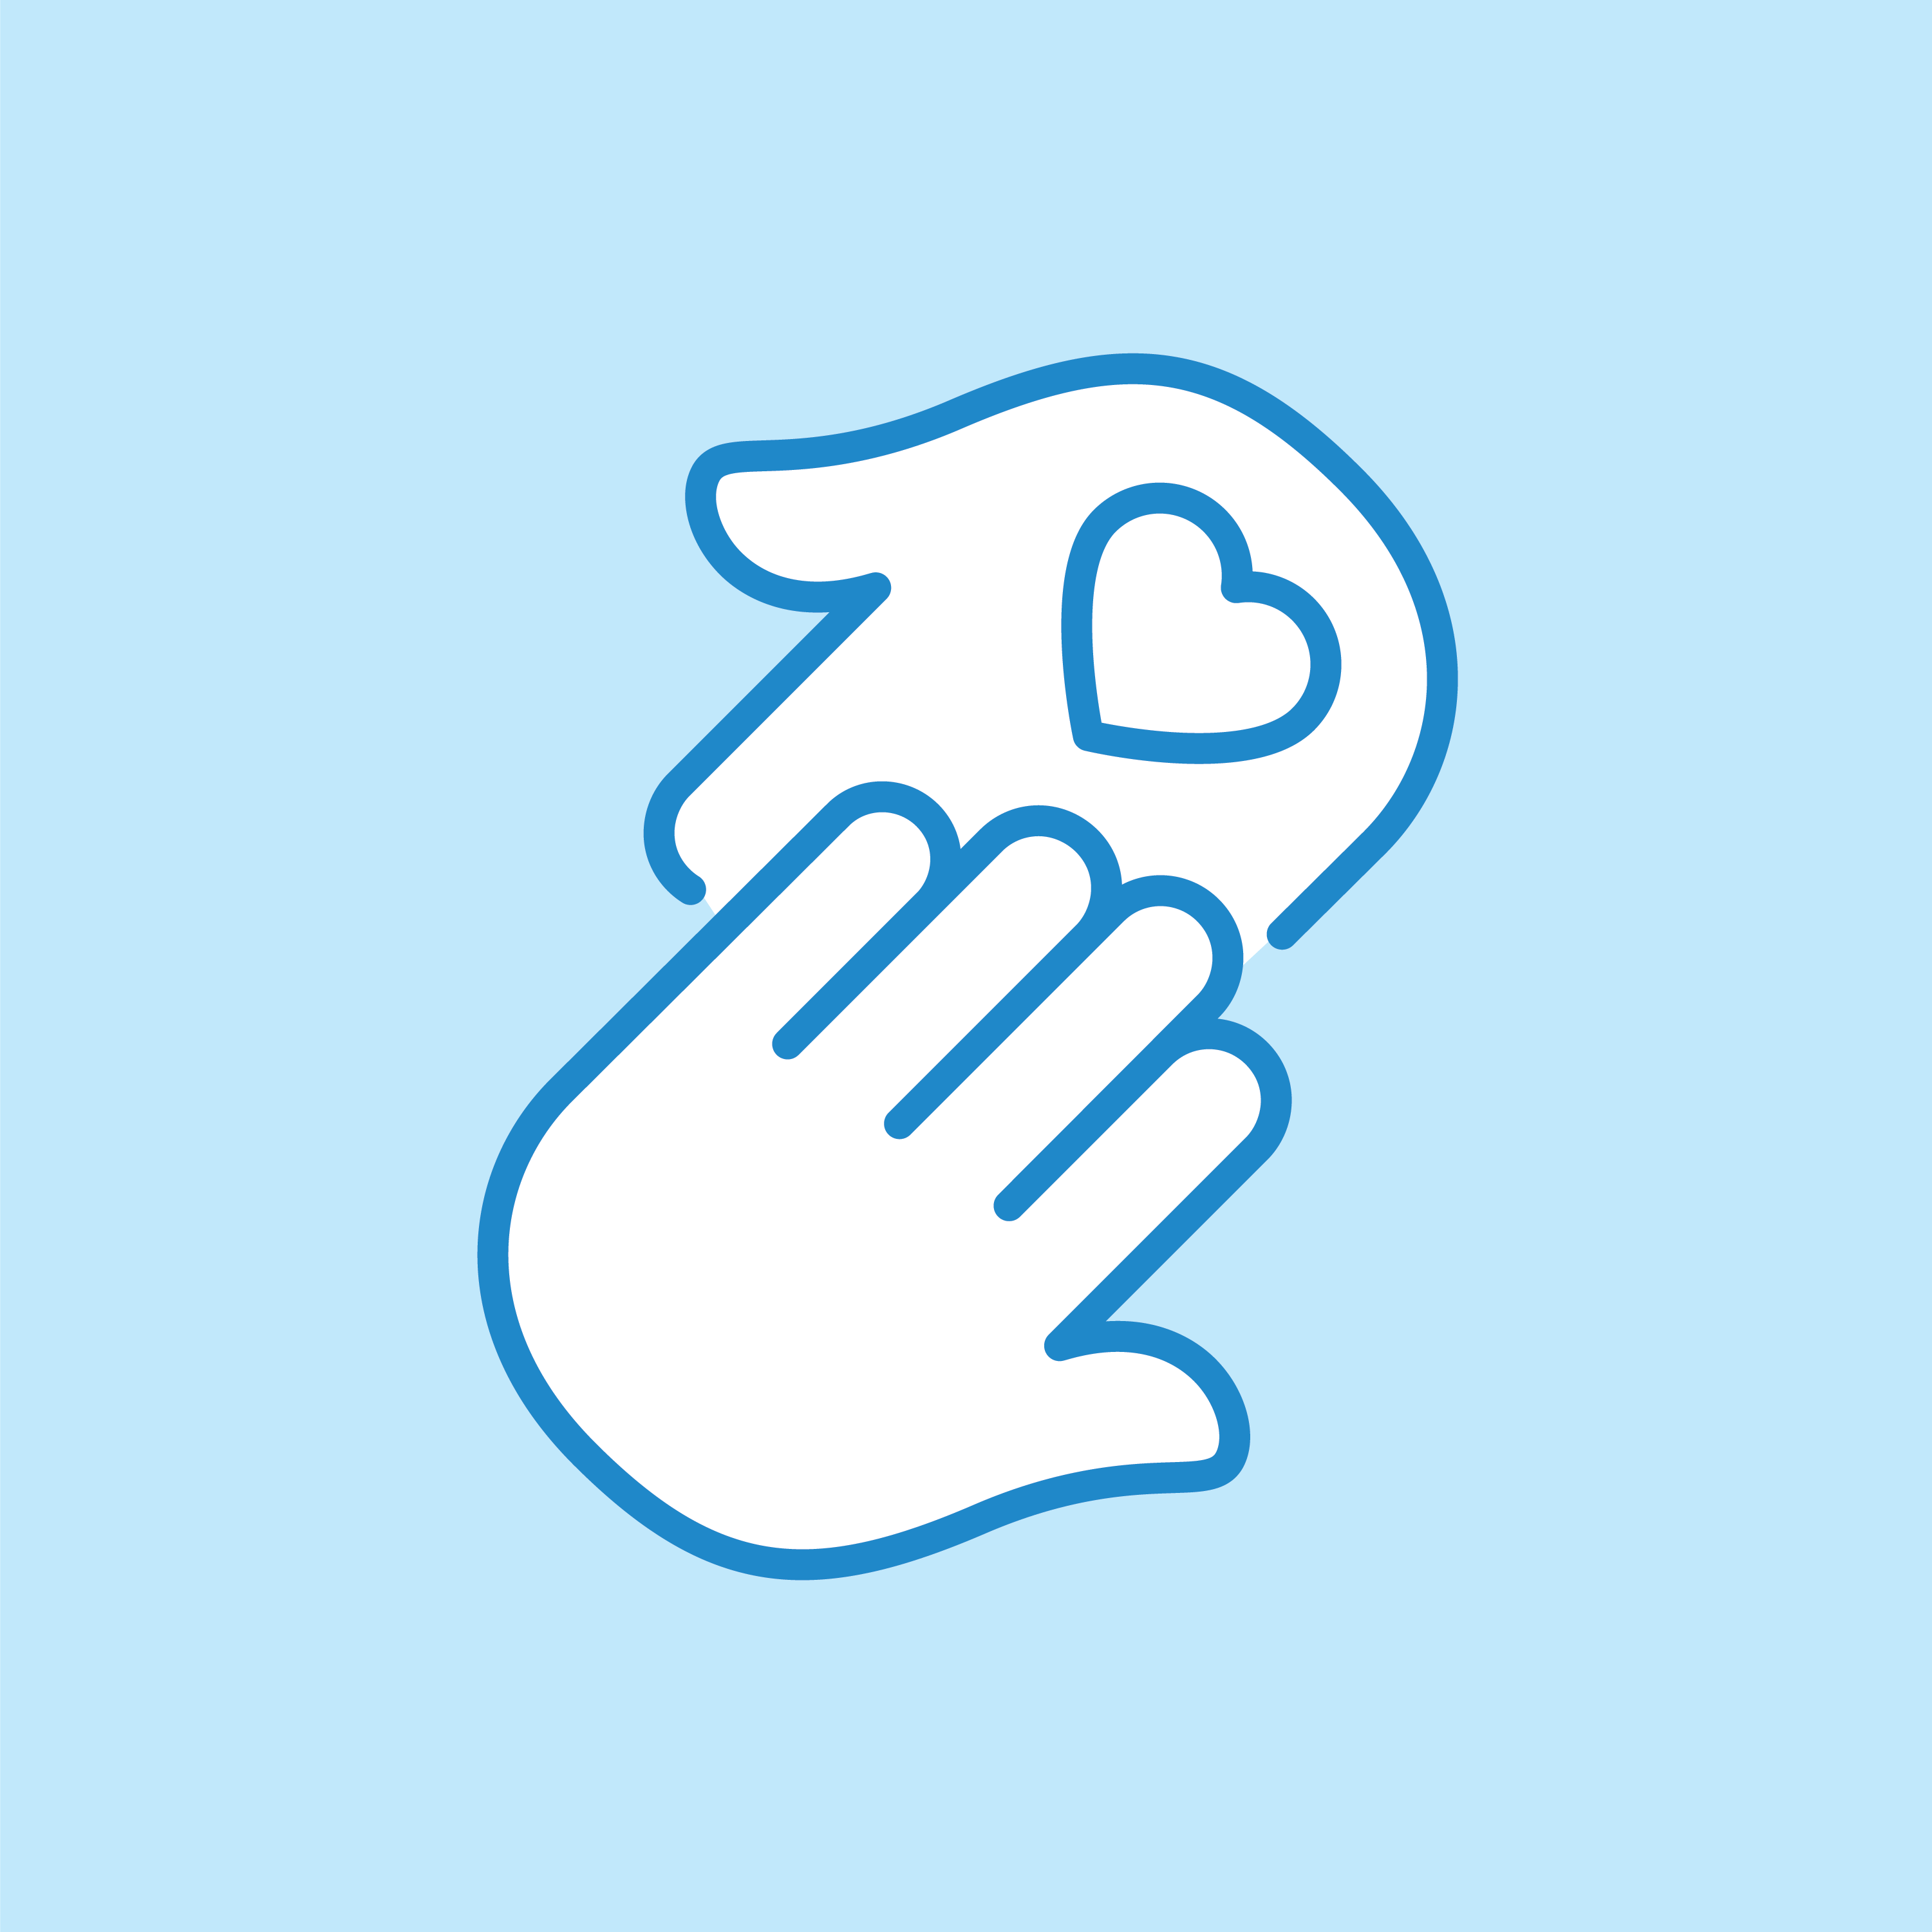 Expand mental health icon.